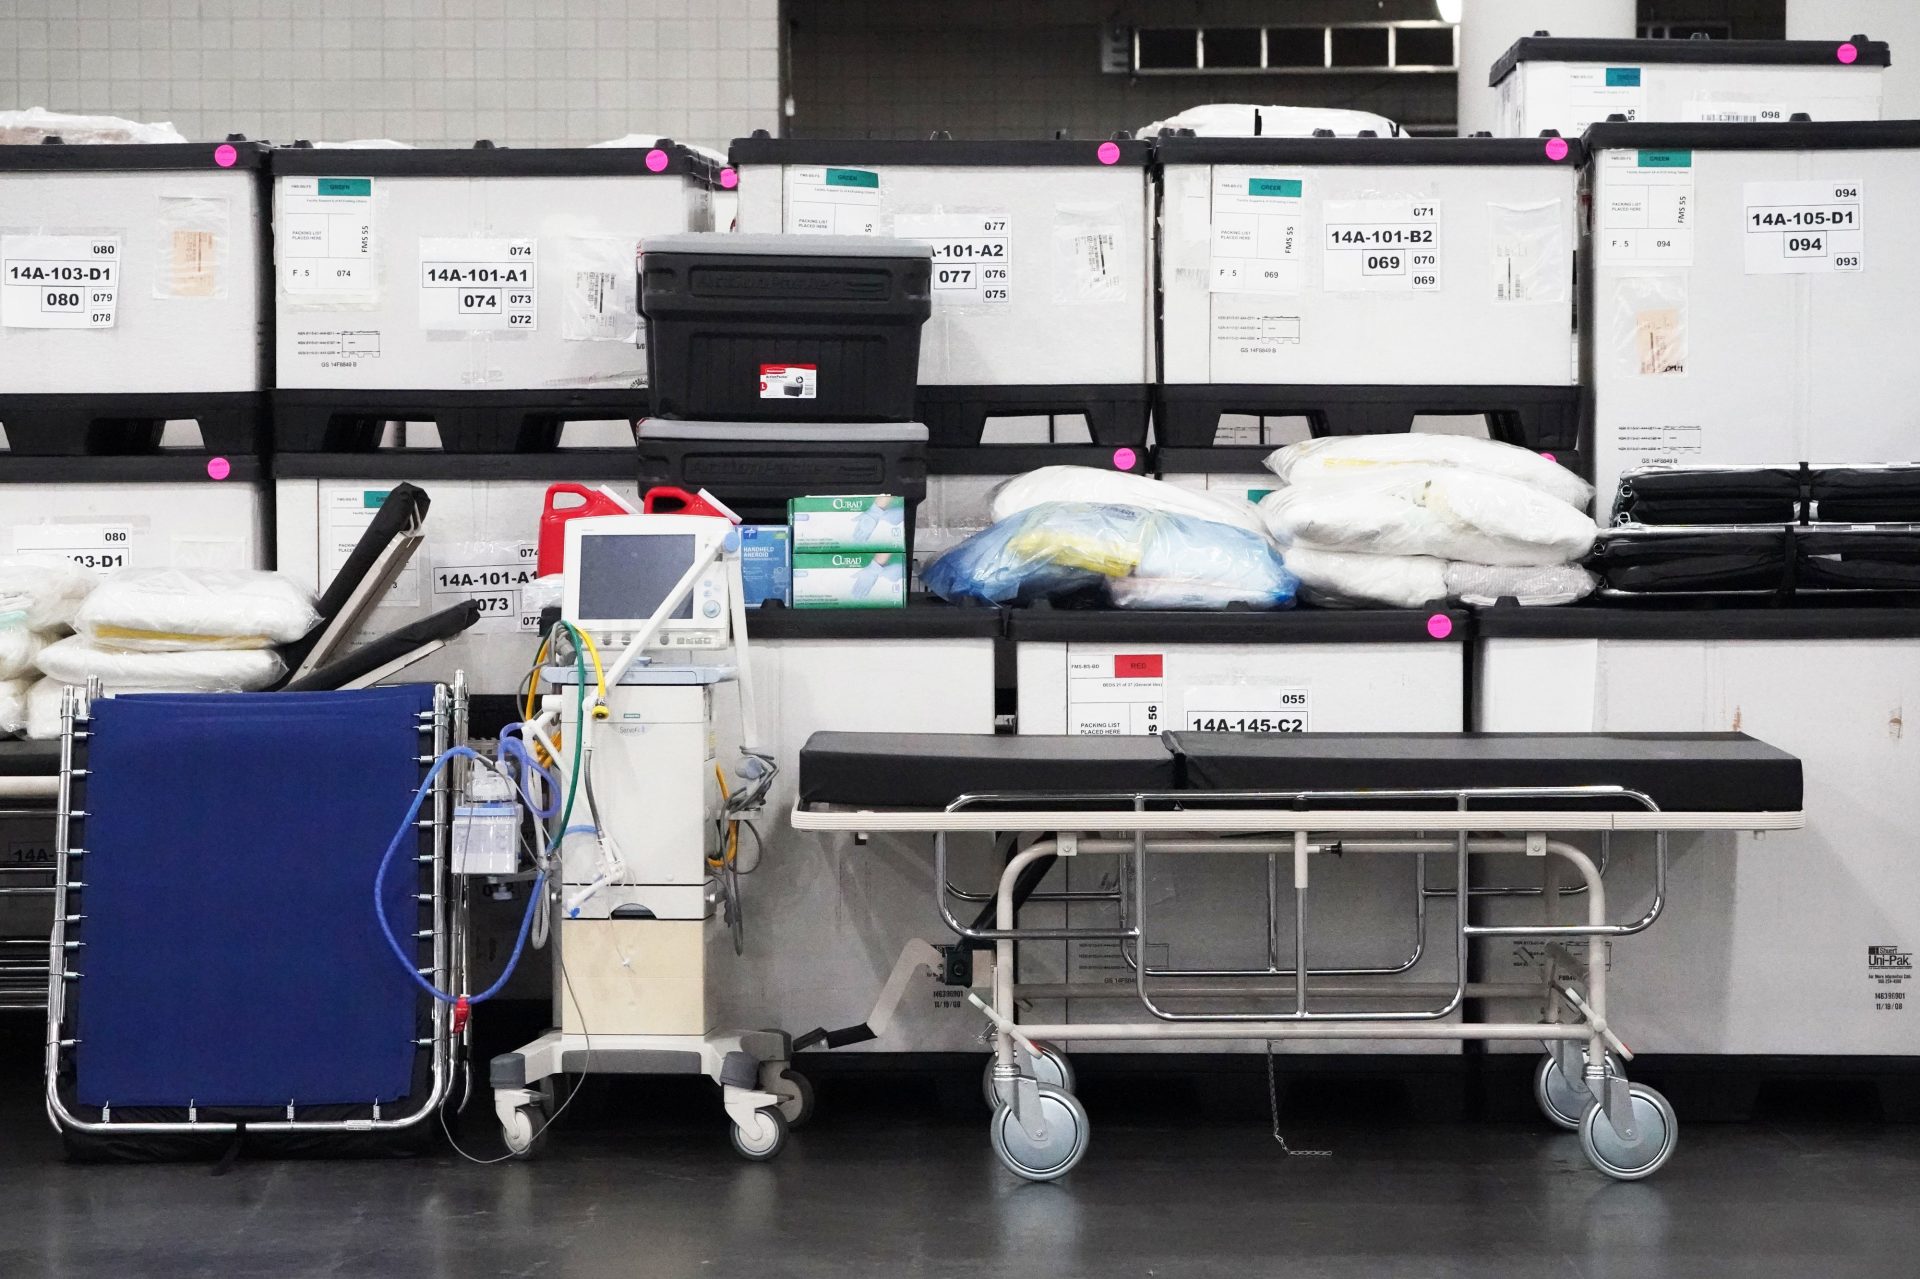 Medical supplies are viewed inside the Javits Center as New York Gov. Andrew Cuomo announces plans to convert the convention center into a field hospital as coronavirus cases continued to rise on March 23 in New York City.